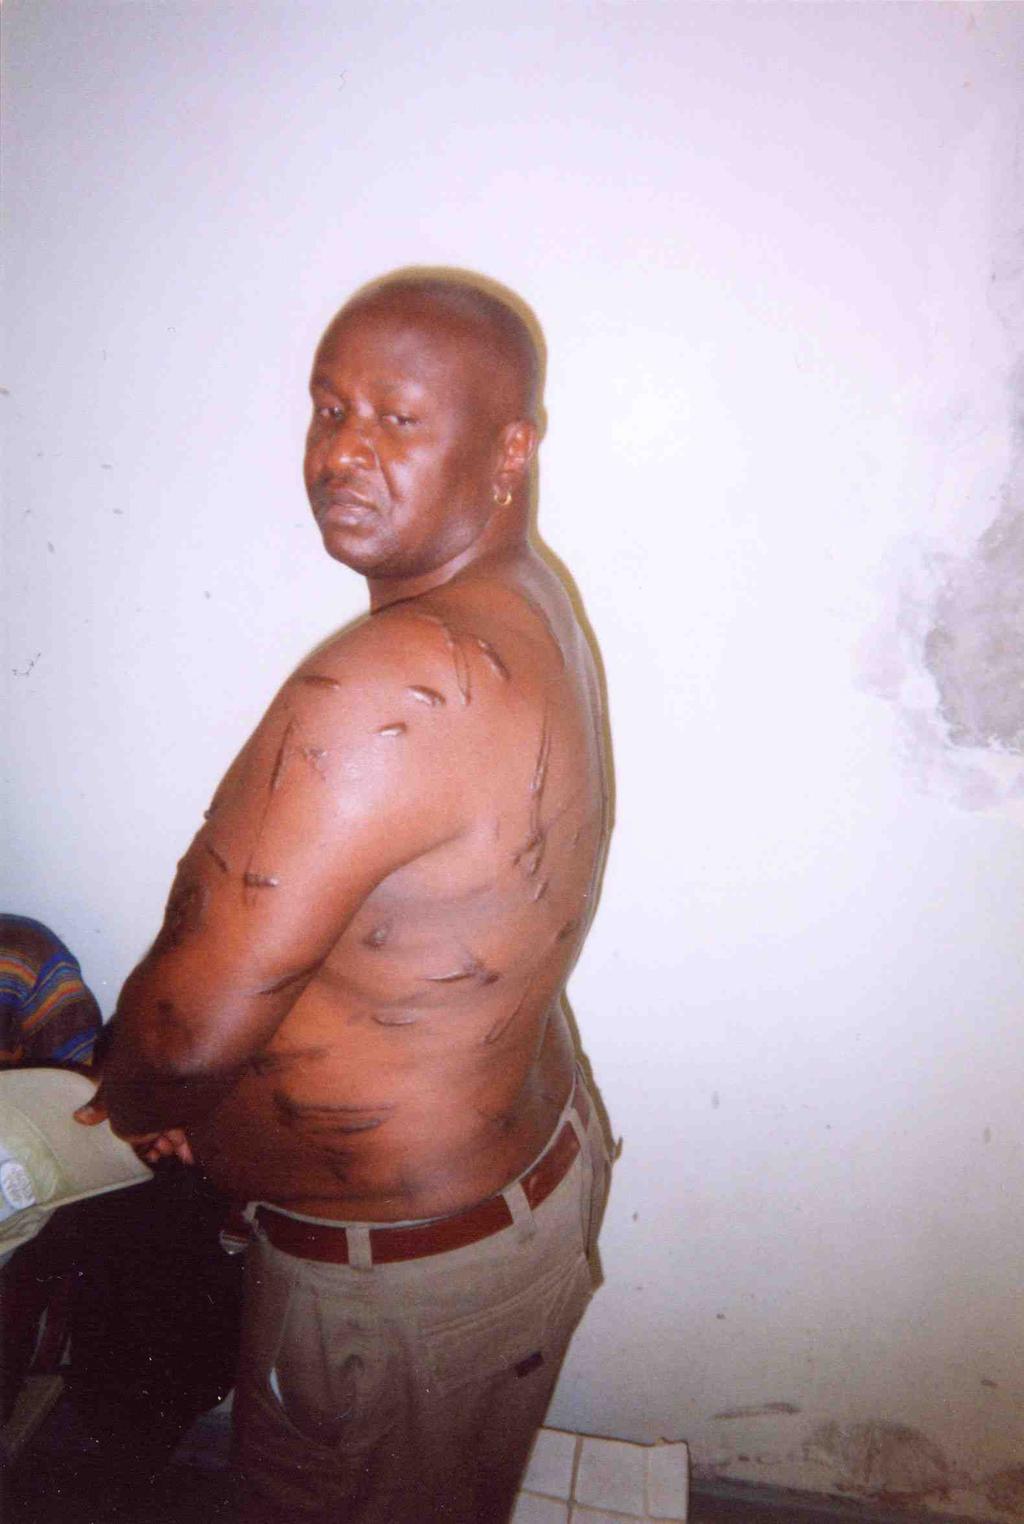 Namibia: Justice delayed is justice denied The Caprivi treason trial 13 Oscar Luphalezwi, a former senior policeman with more than 24 years experience, was one of those arrested and tortured